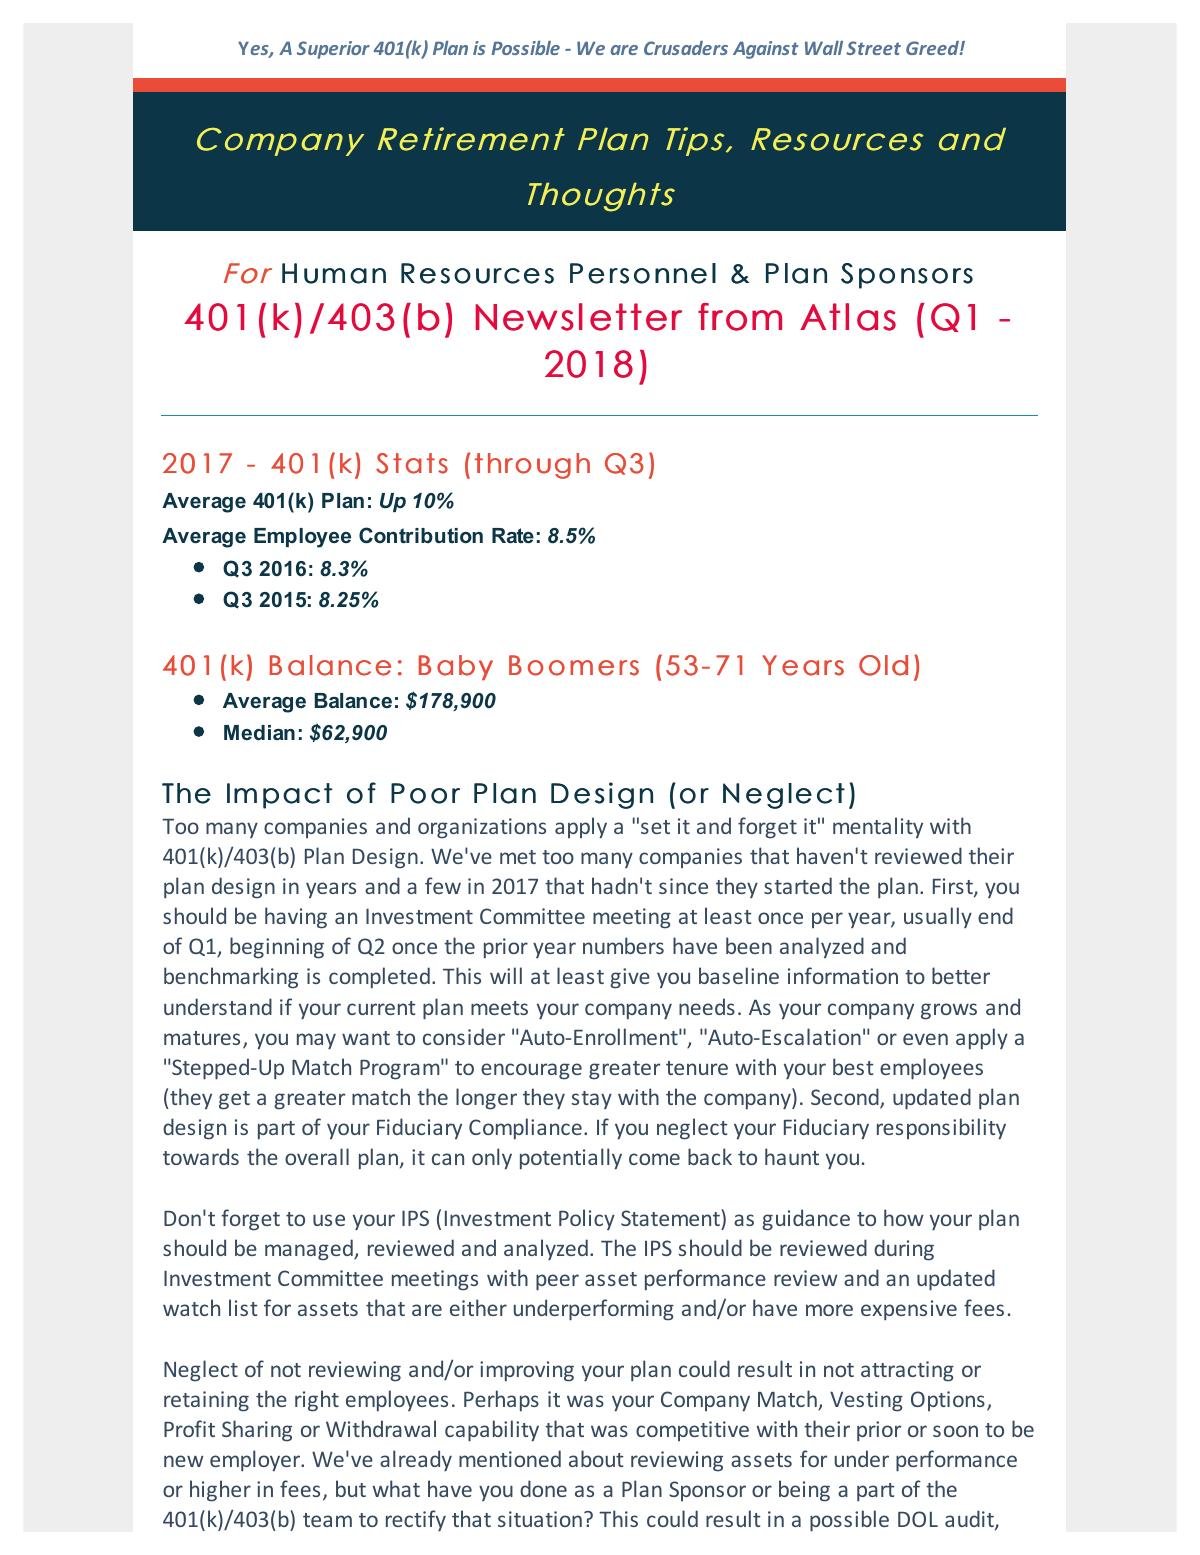 401(k) Q1 2018 – Newsletter (Tips, Resources and Commentary)